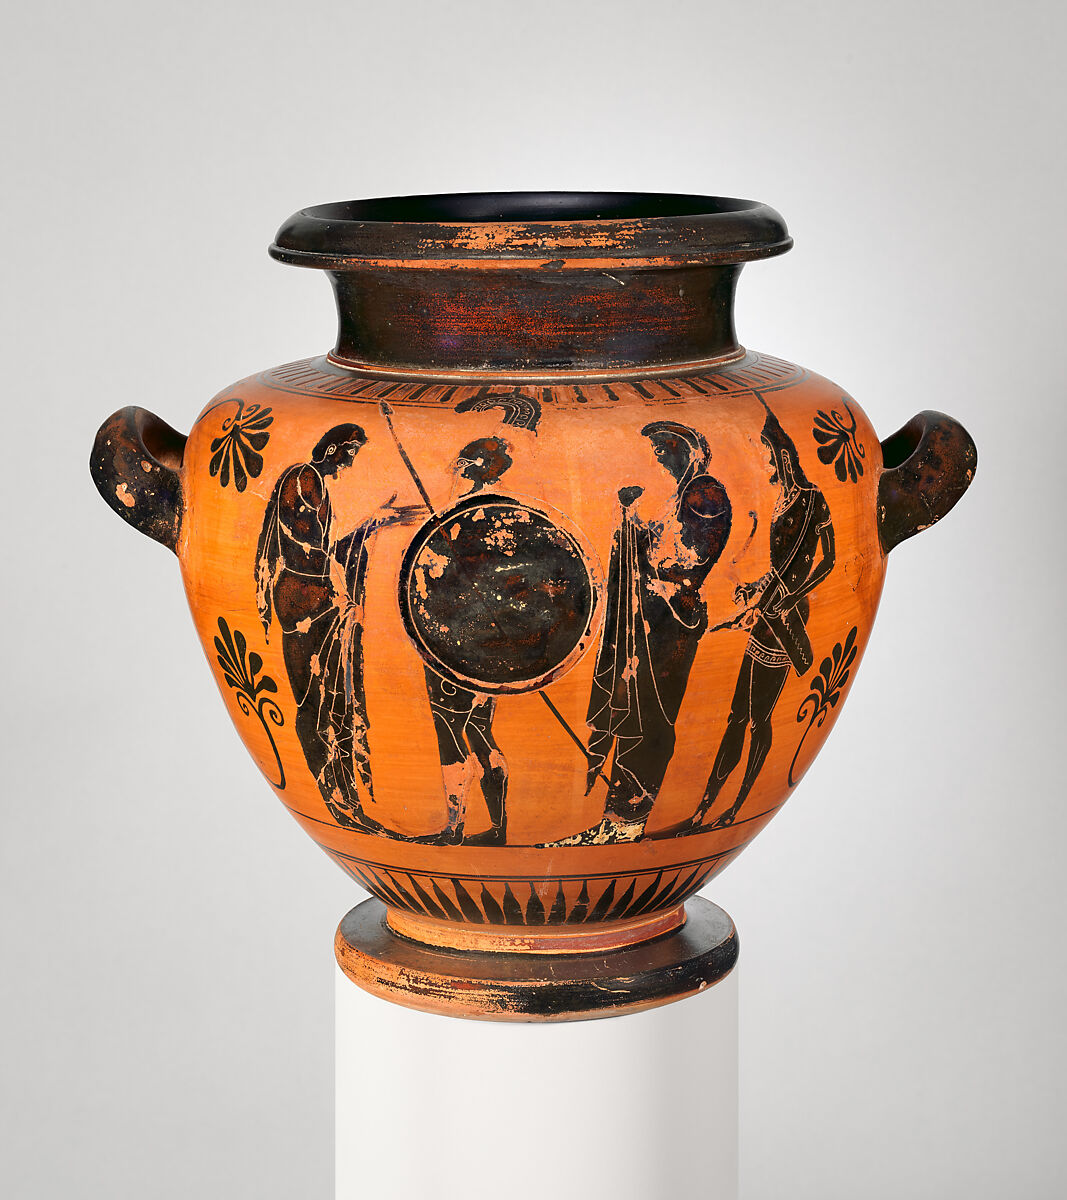 Terracotta stamnos (storage jar), Attributed to an artist related in style to the Antimenes Painter, Terracotta, Greek, Attic 